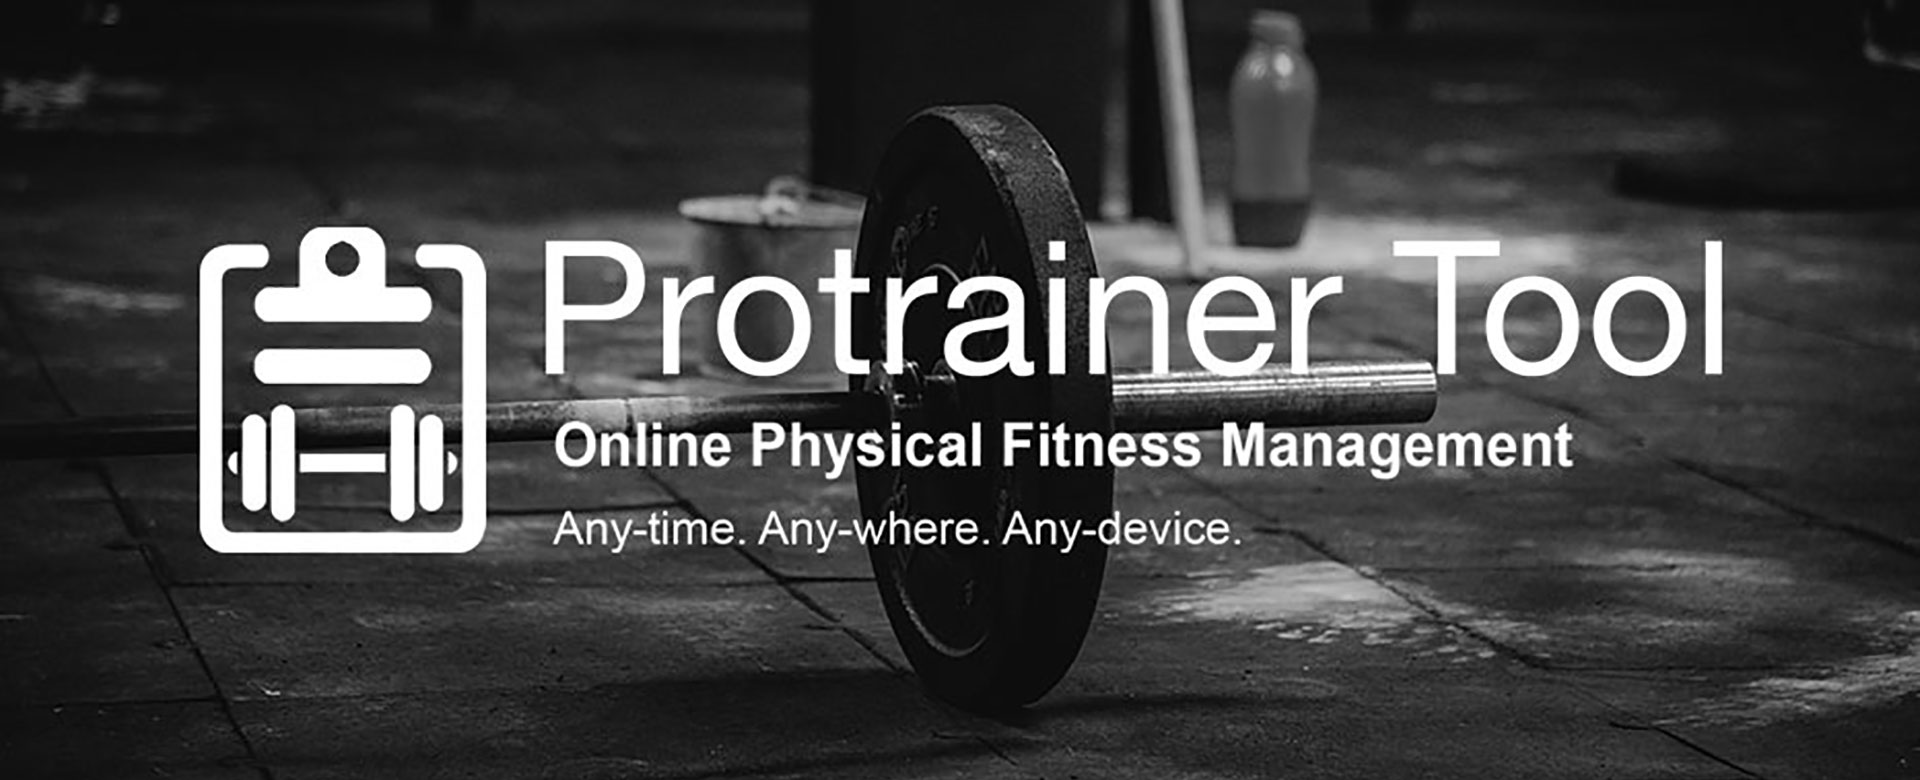 Protrainer Tool: Online fitness management and reporting.